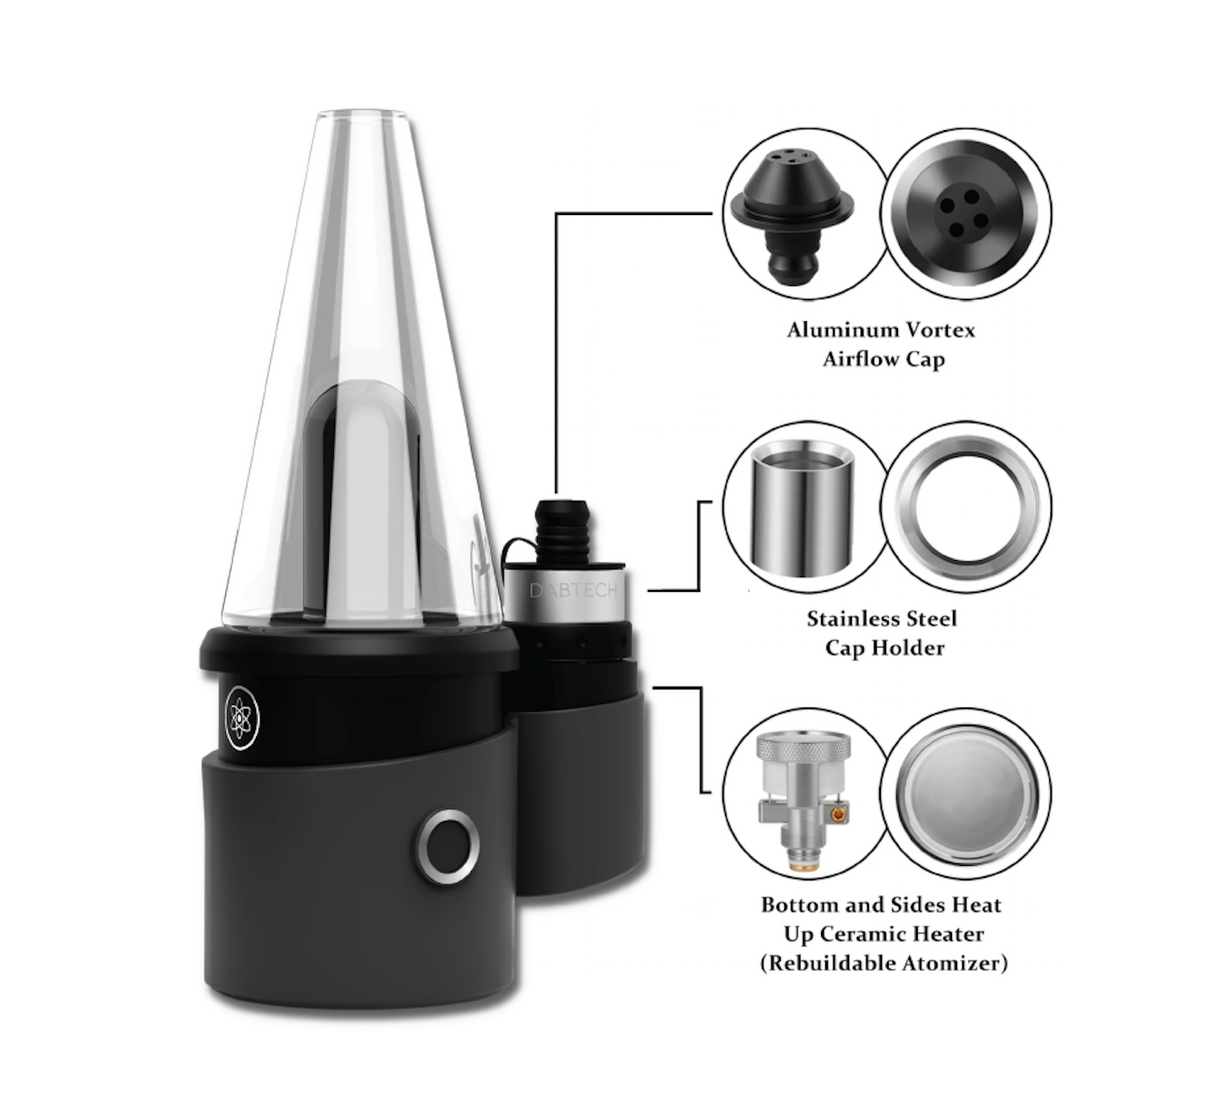 Dabtech Duvo X Vaporizer with Ceramic Heater and Vortex Airflow Cap - Exploded View